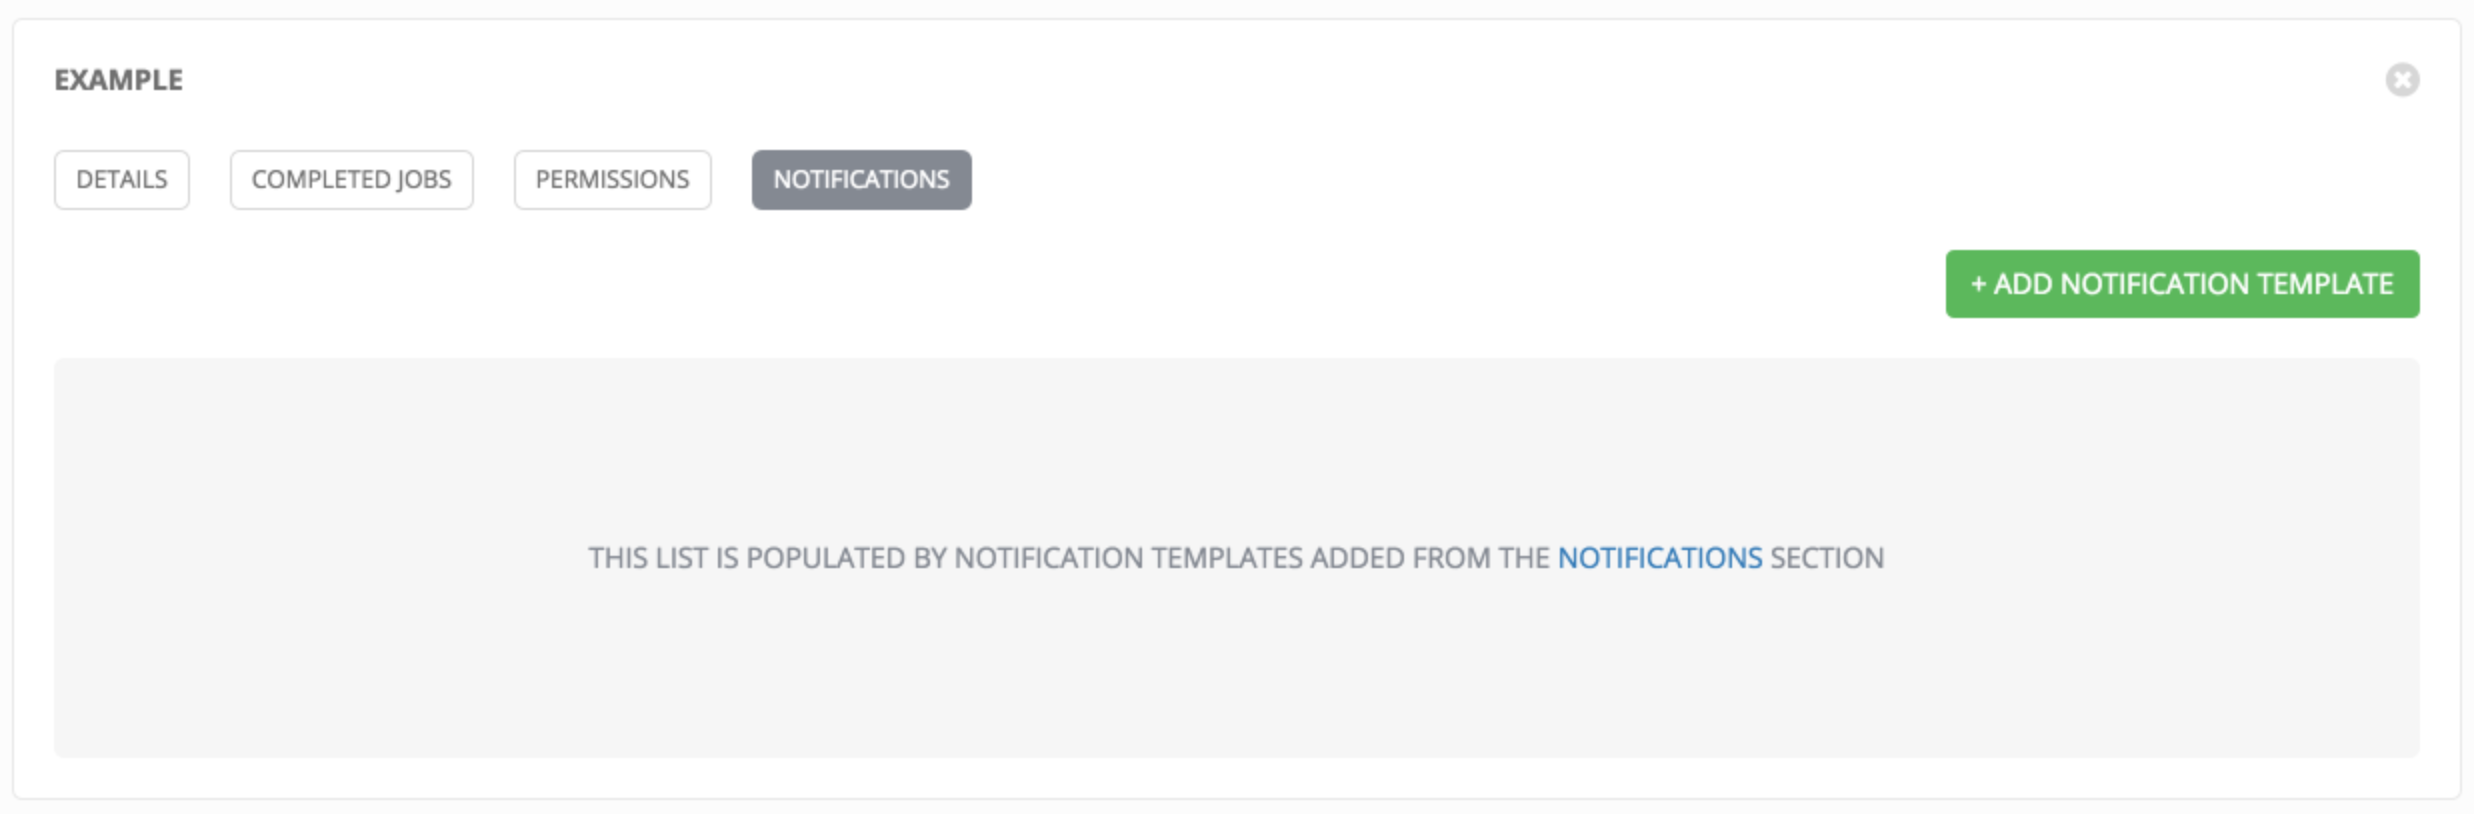 _images/job-template-completed-notifications-view.png